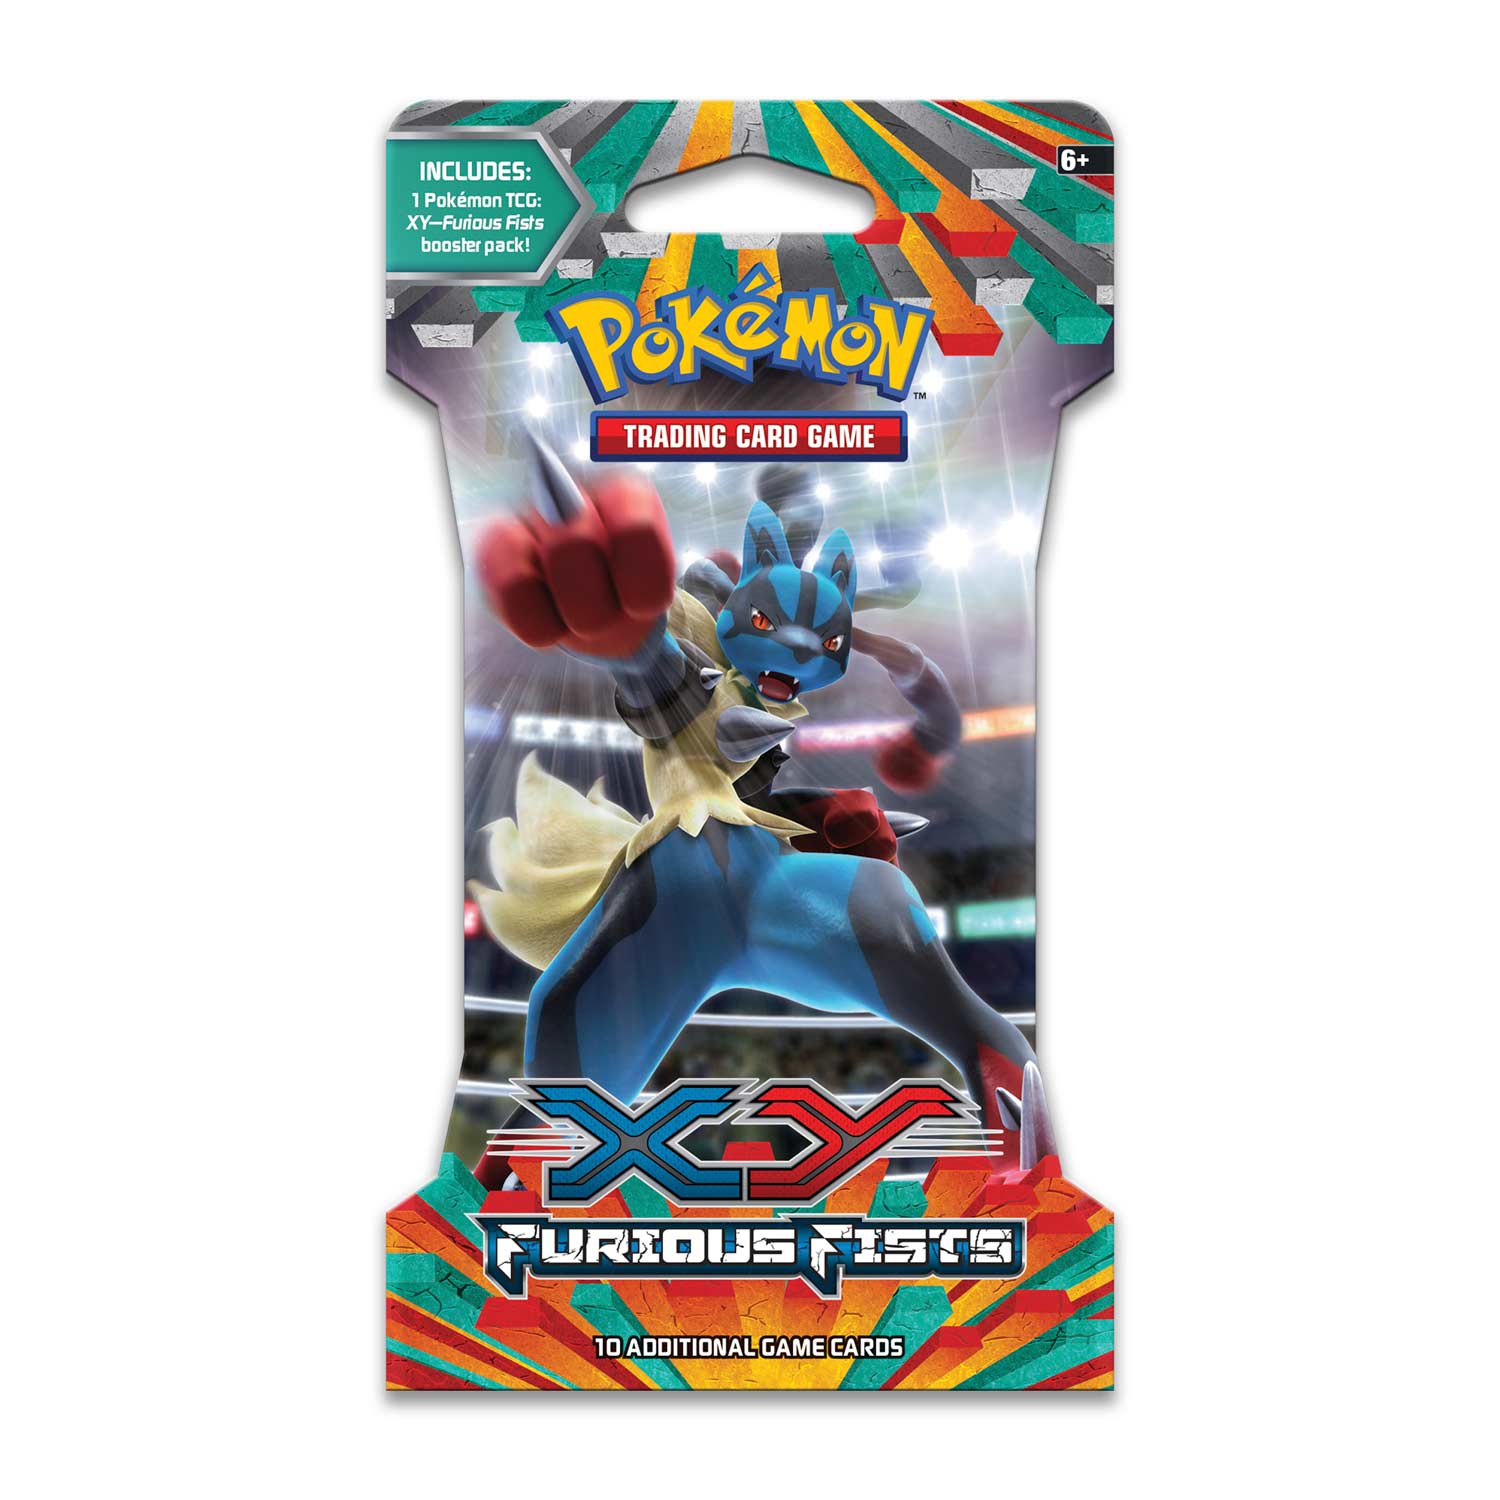 Sleeved Booster Pack Sealed Pokemon 2B3 Pokemon XY: Furious Fists 